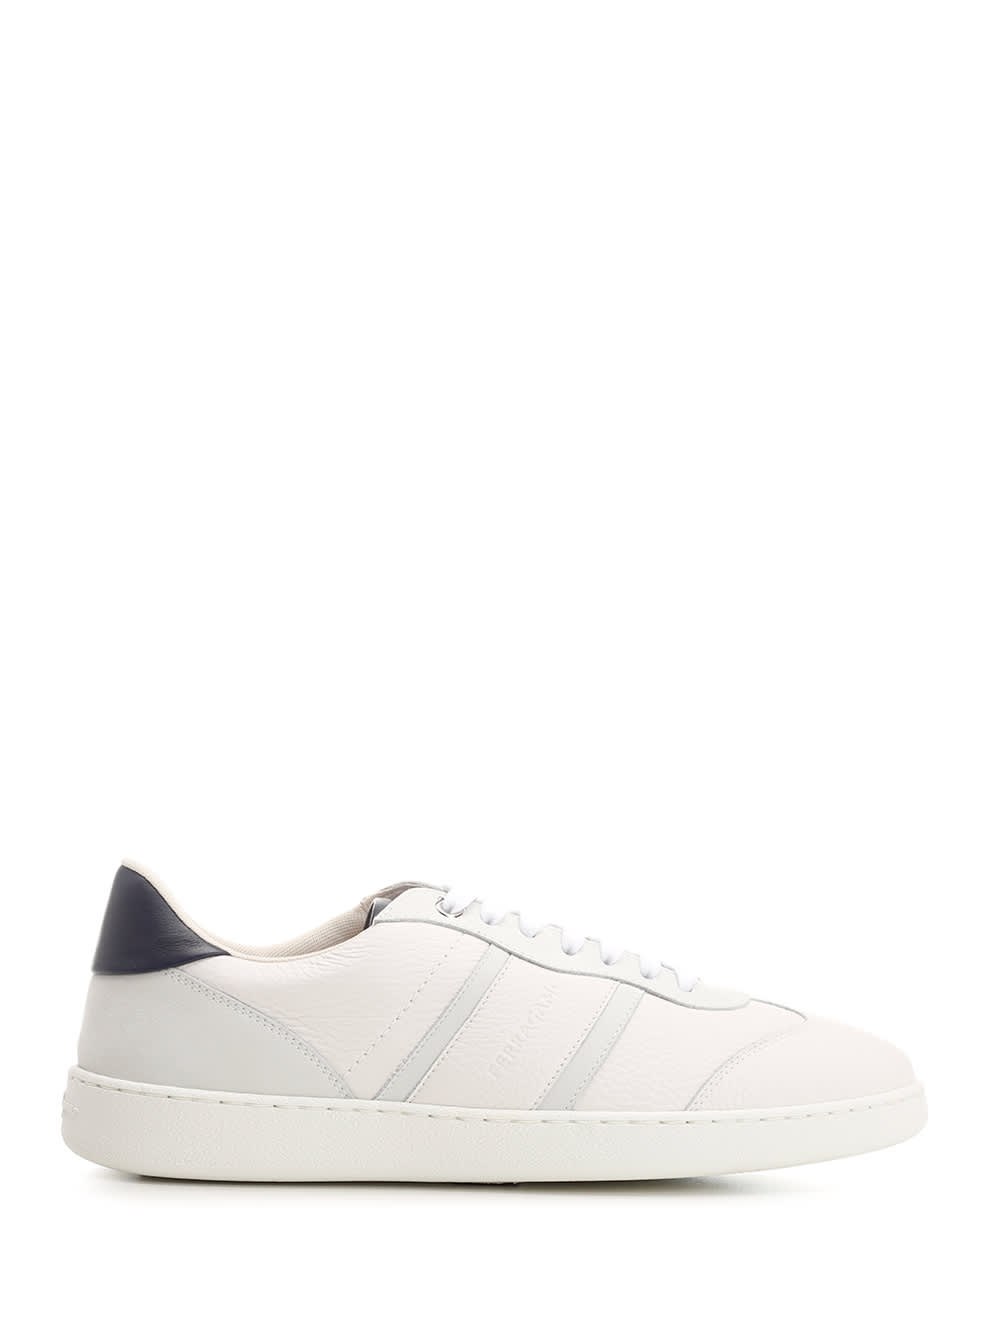 White Sneakers With Blue Heel Tab